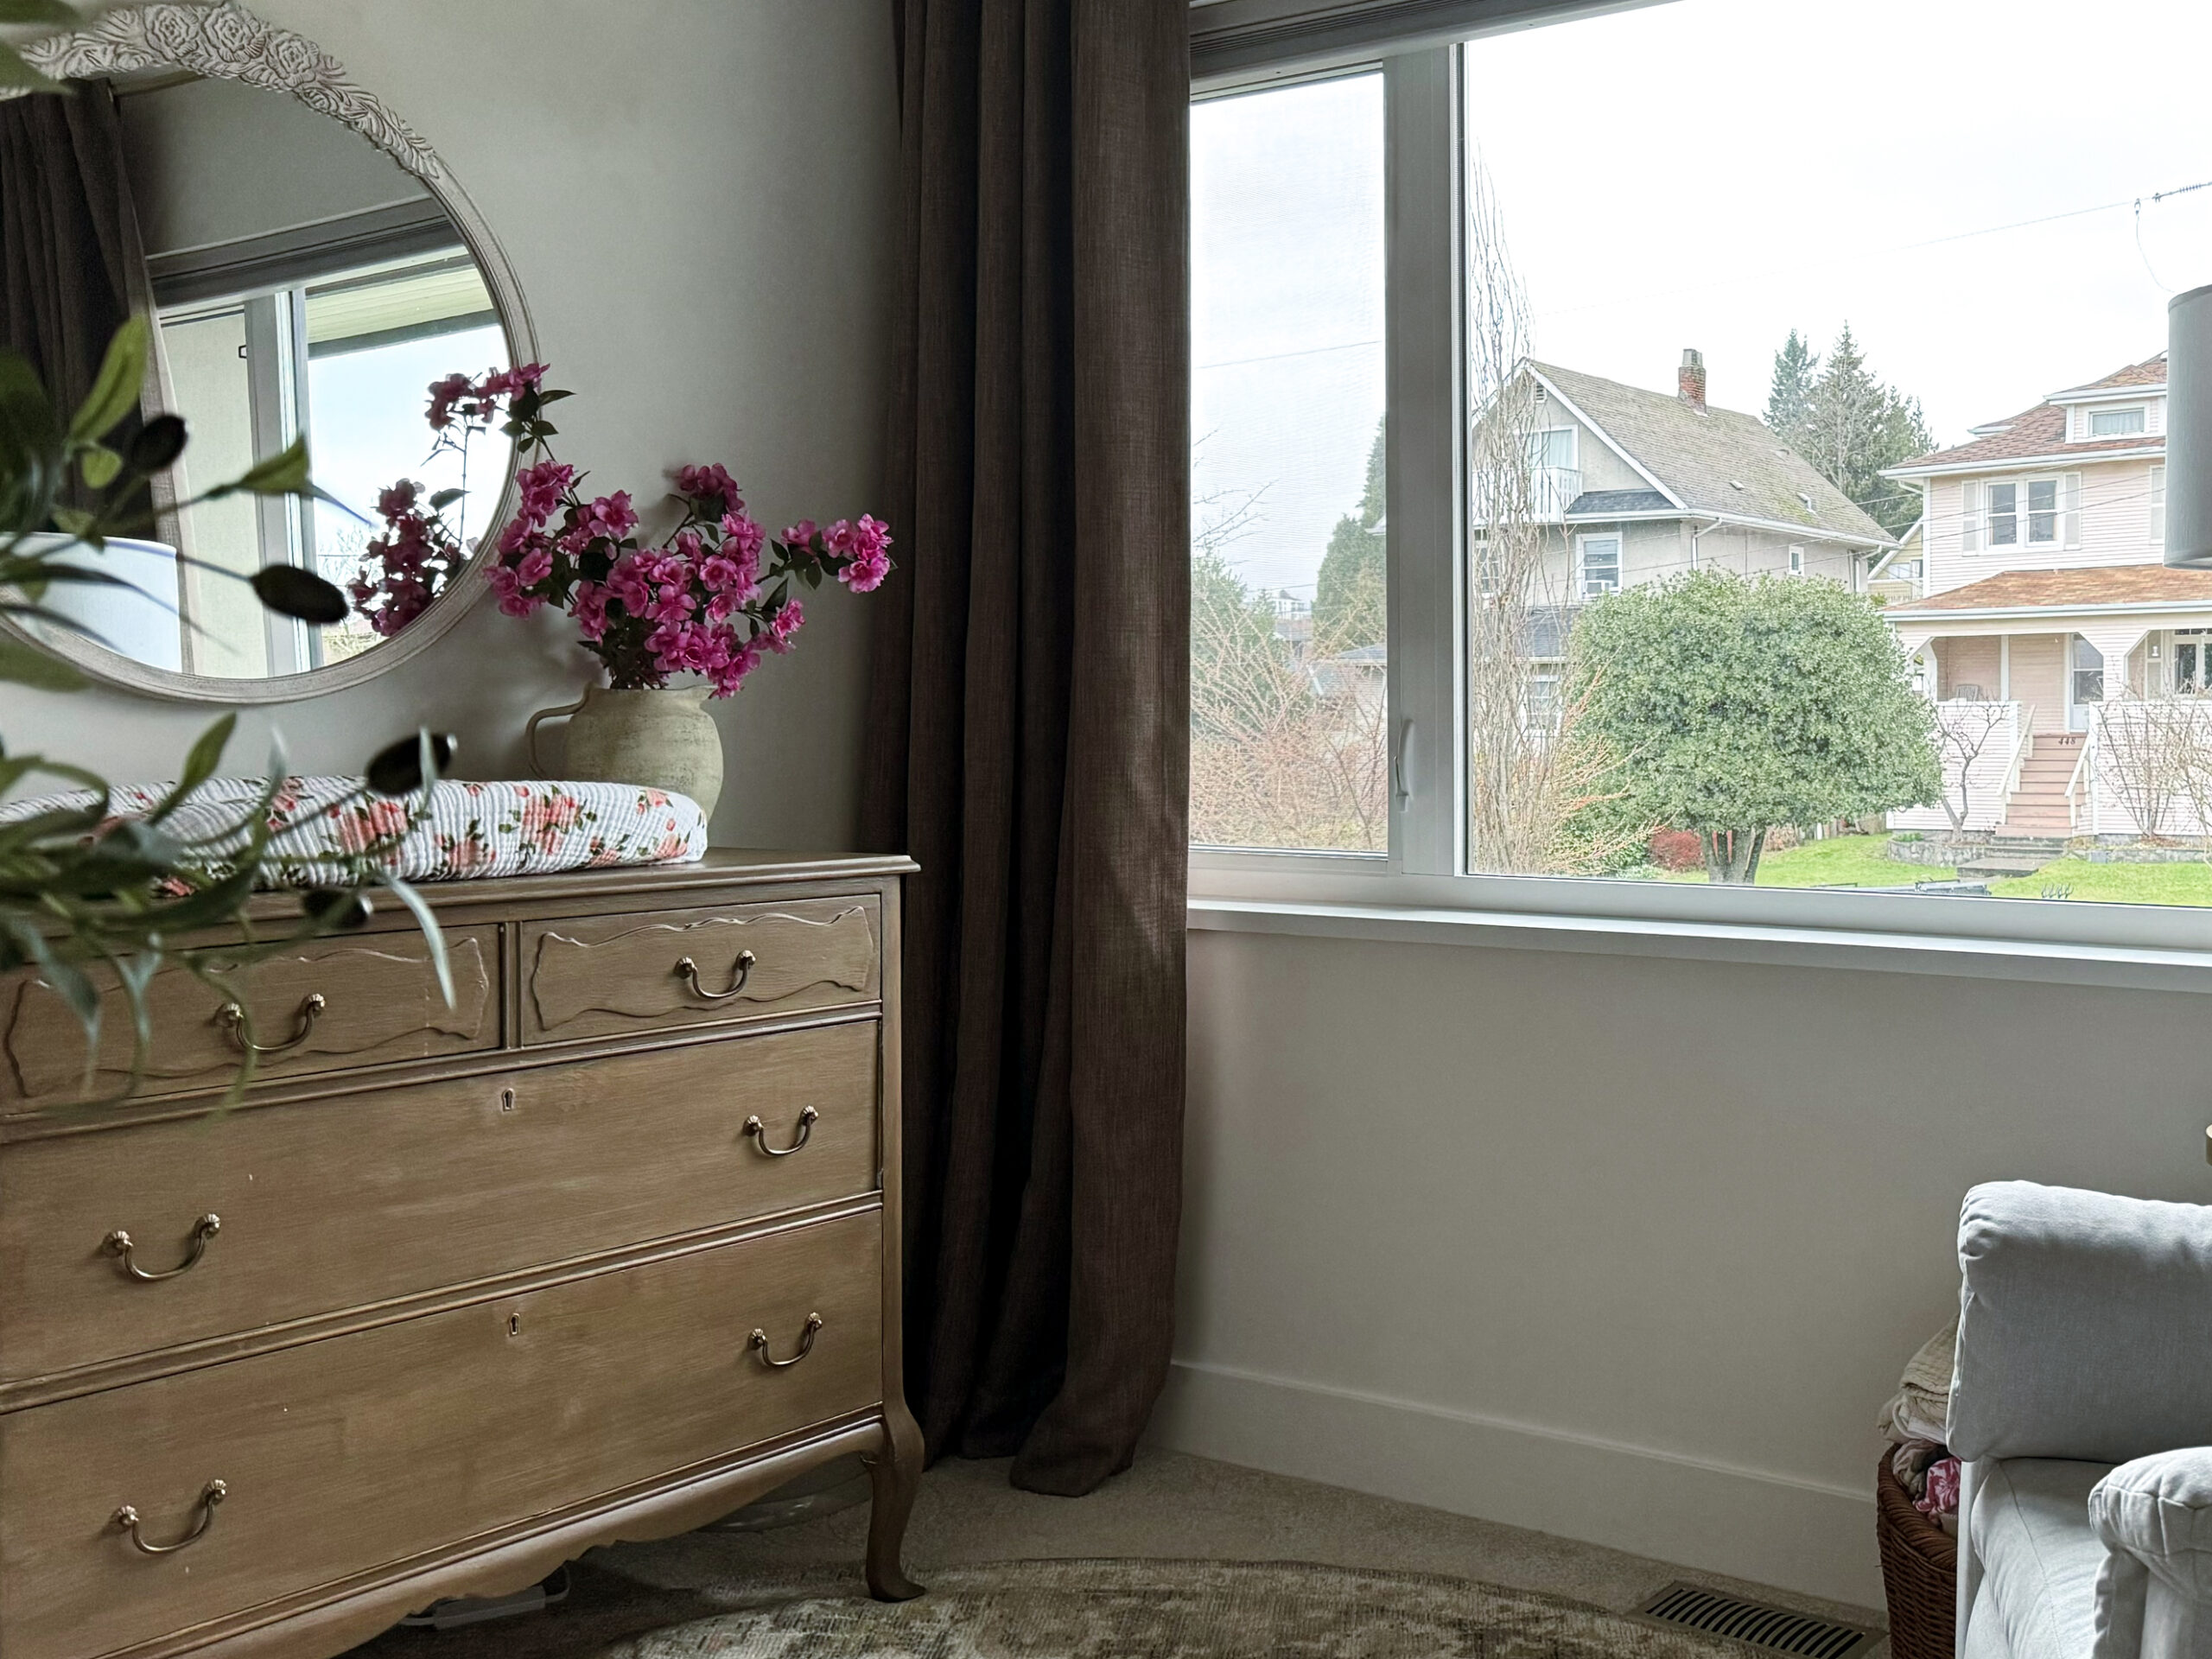 Making your curtains look expensive - a nursery with brown curtains and a dresser as a change table